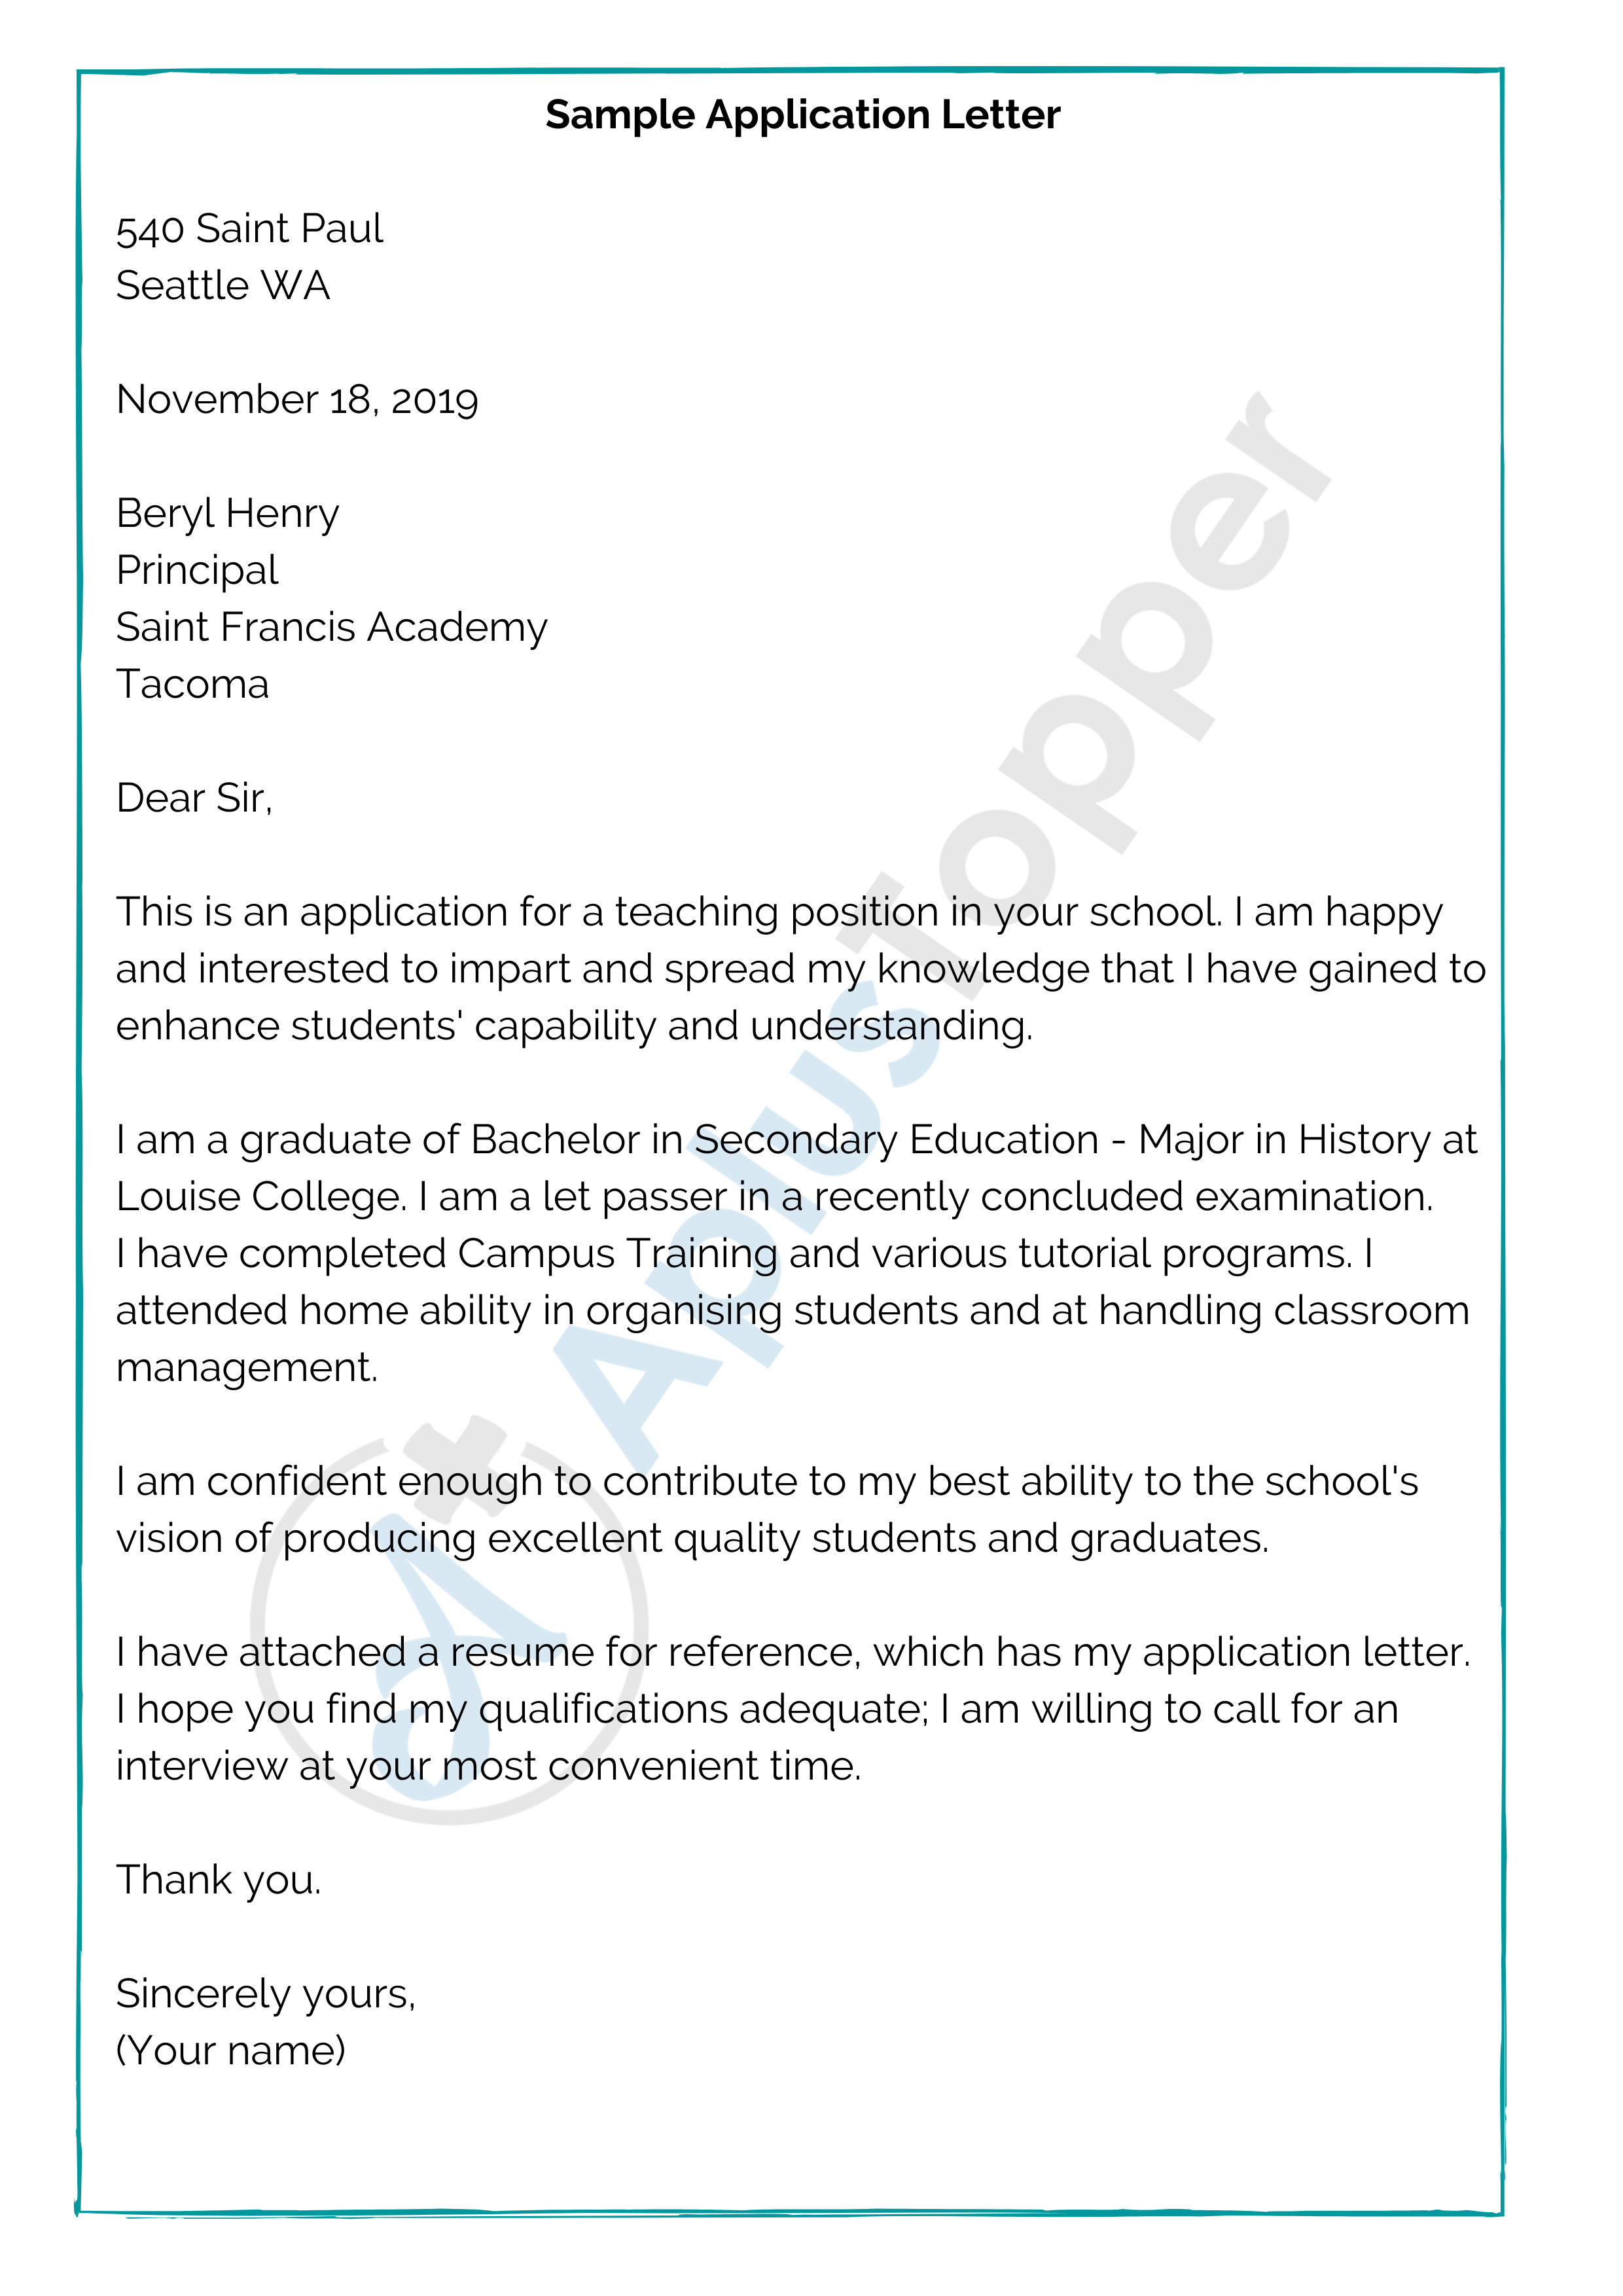 application letter sample text